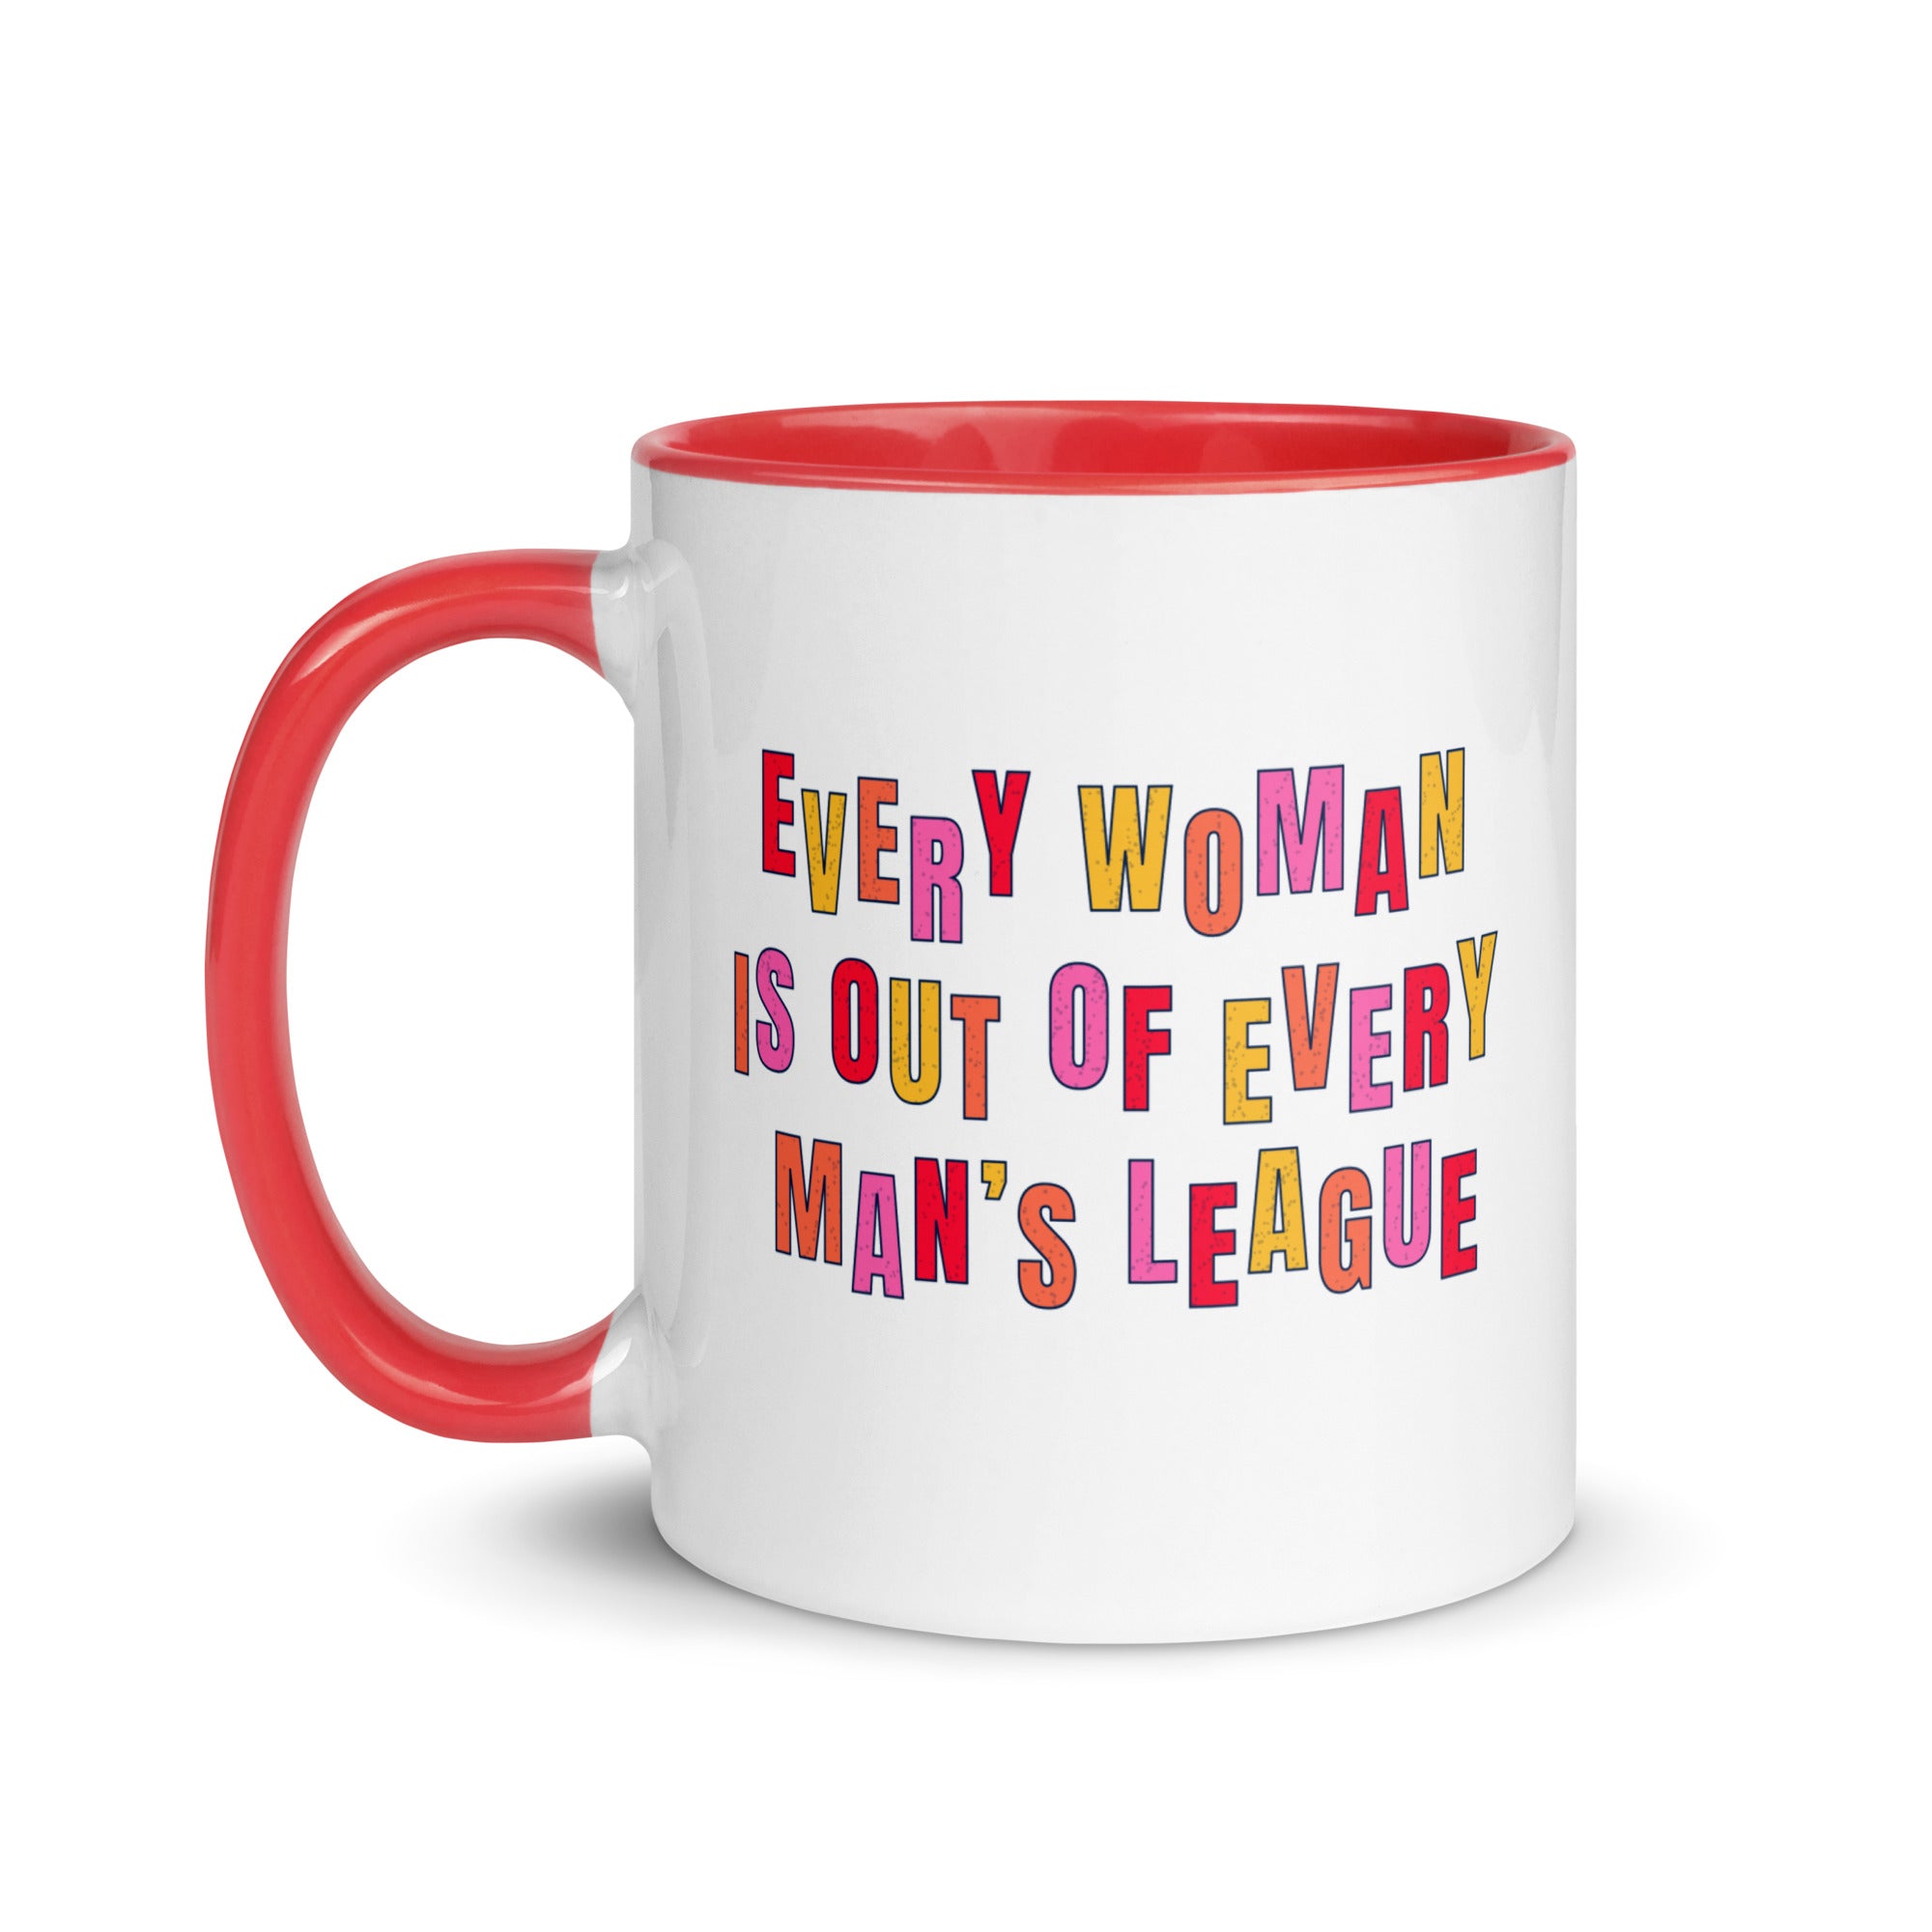 Every Woman Is Out Of Every Man’s League Mug